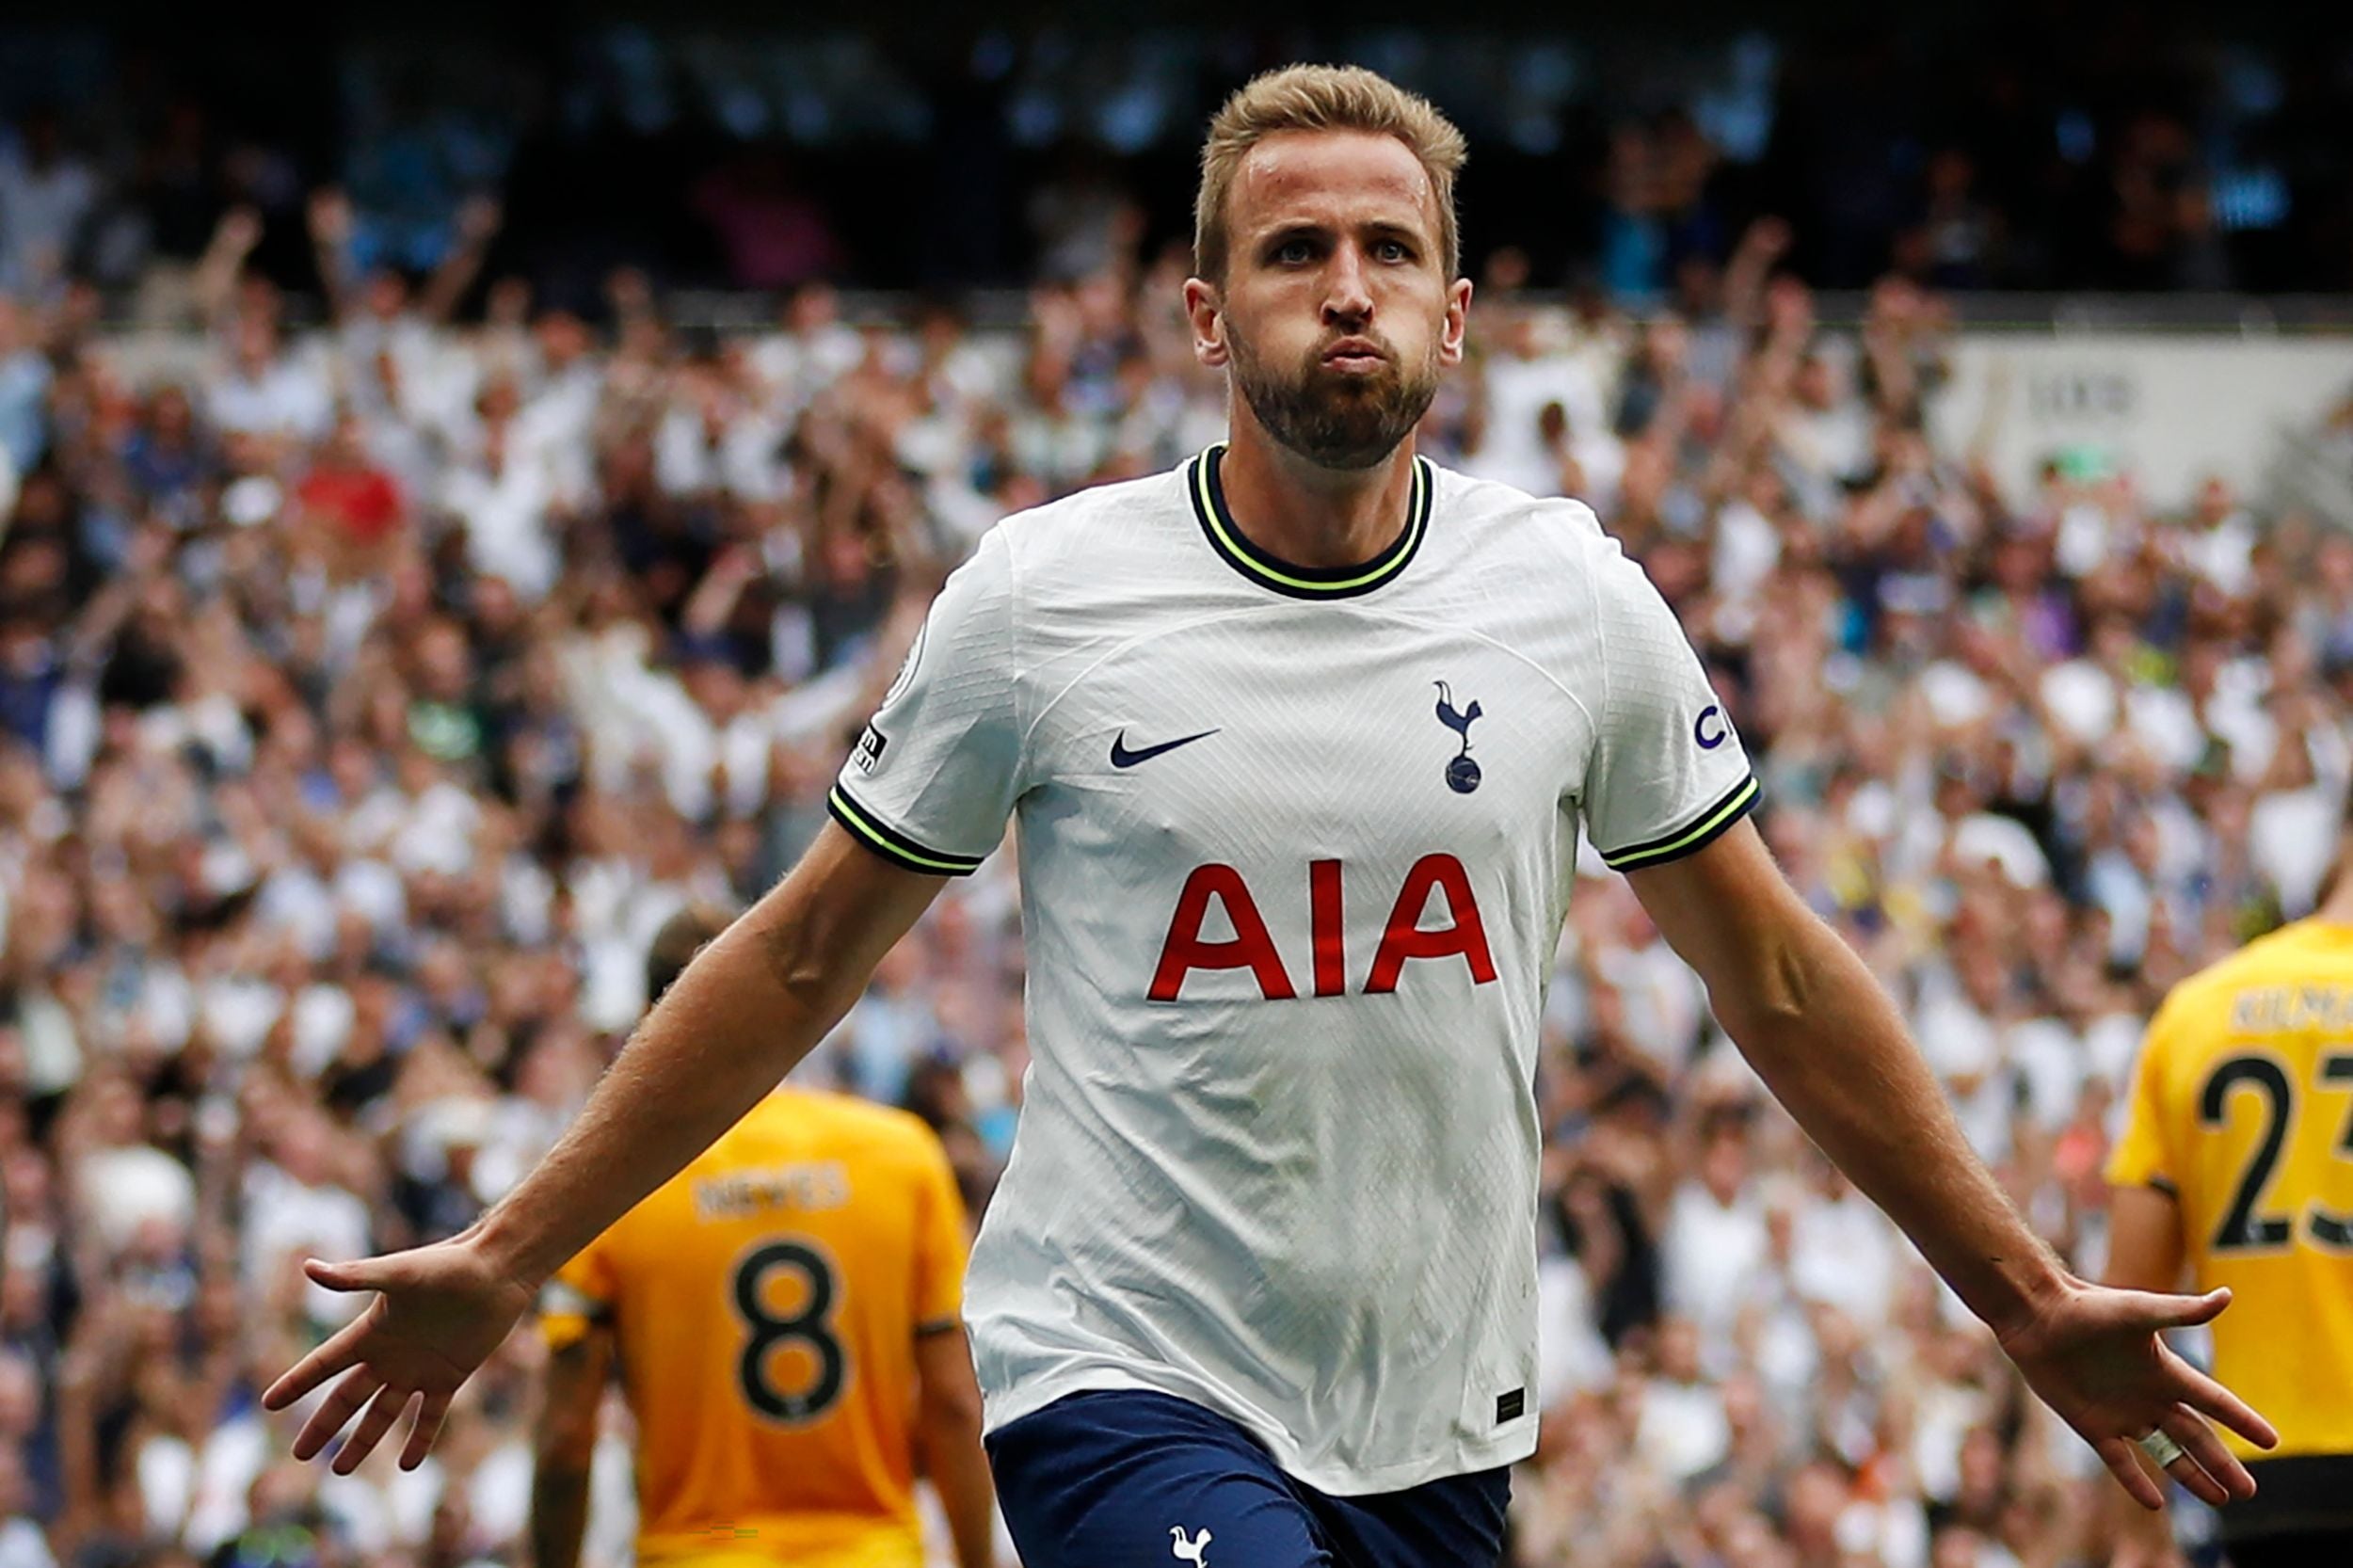 Kane’s second-half winner, his 250th goal for the club in all competitions, was also the 1,000th Premier League goal scored on home soil by Spurs